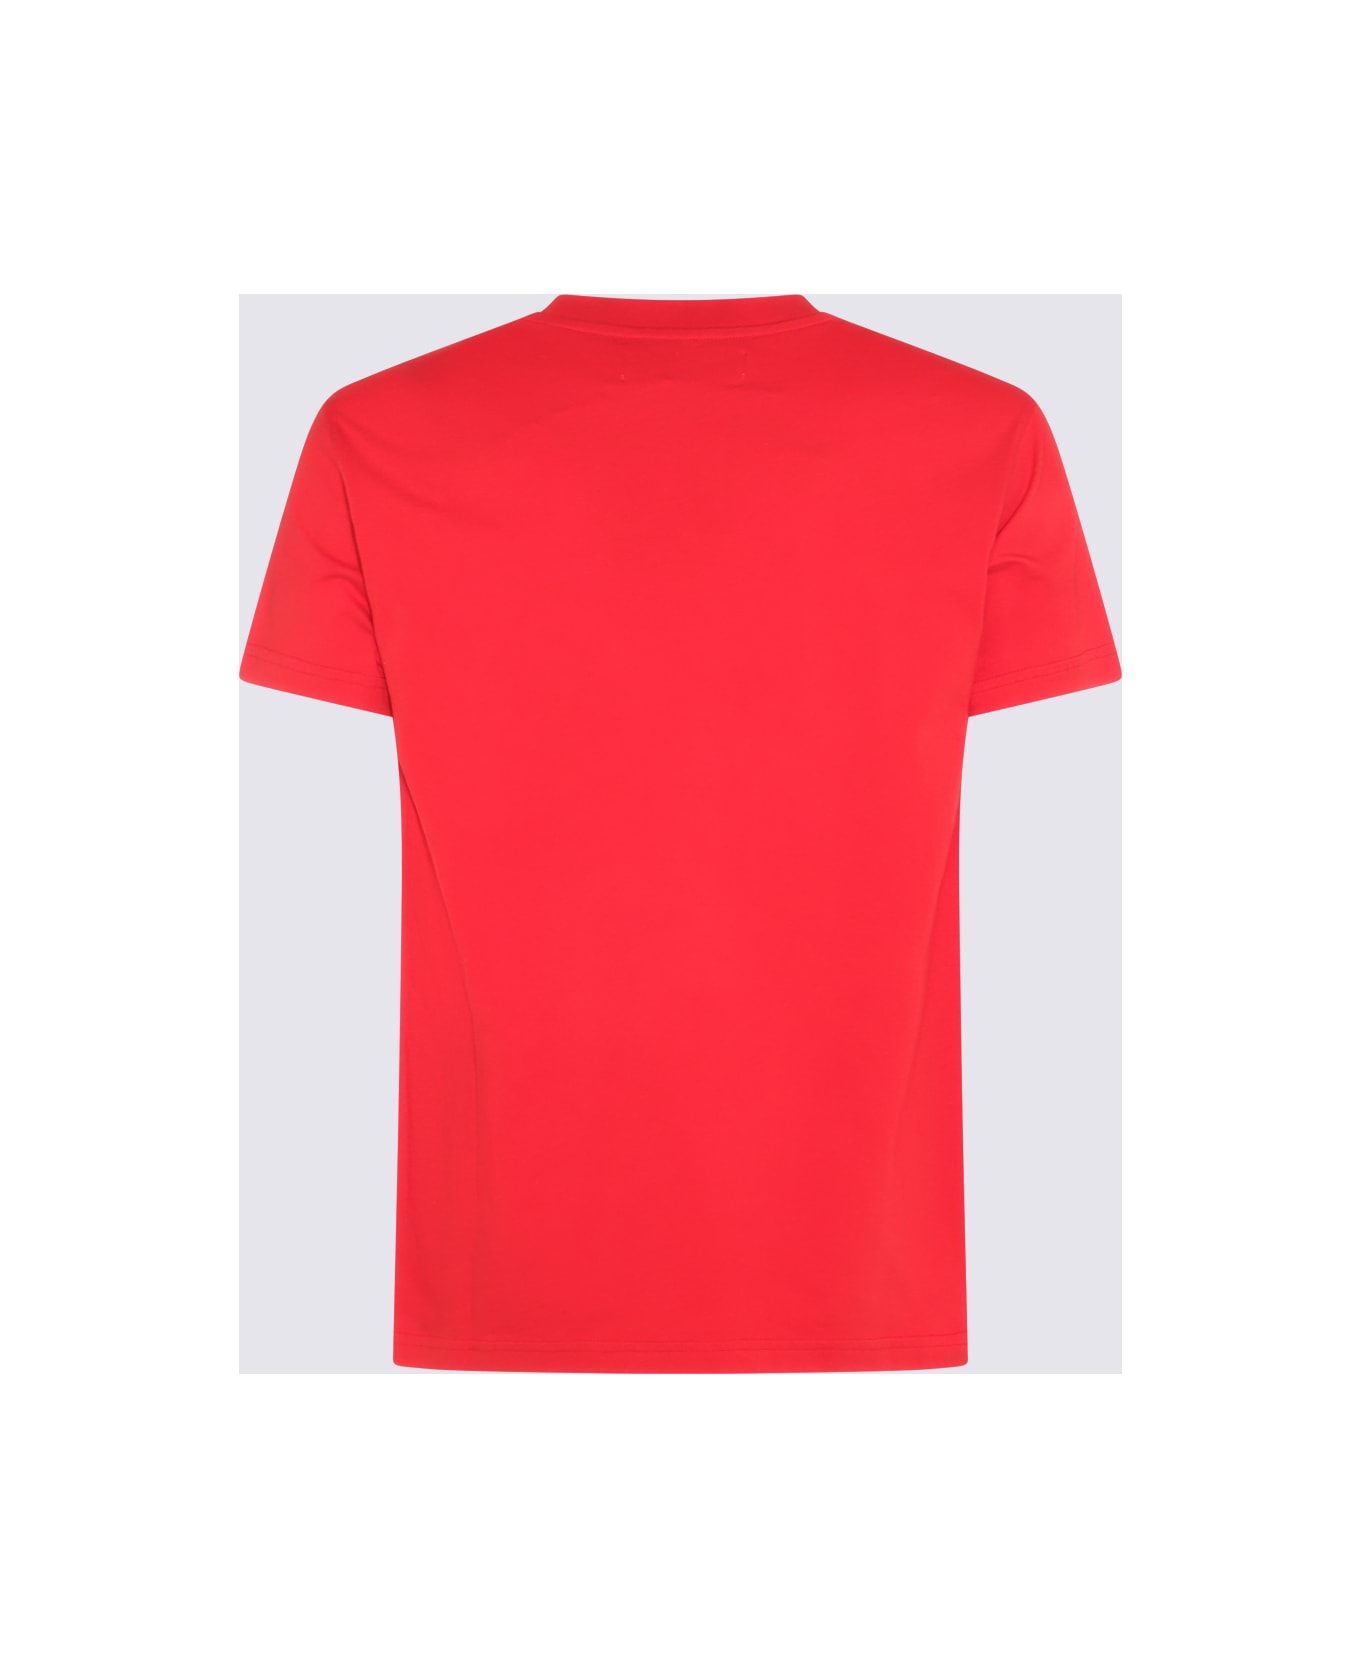 Vivienne Westwood Red Cotton T-shirt - Red Tシャツ